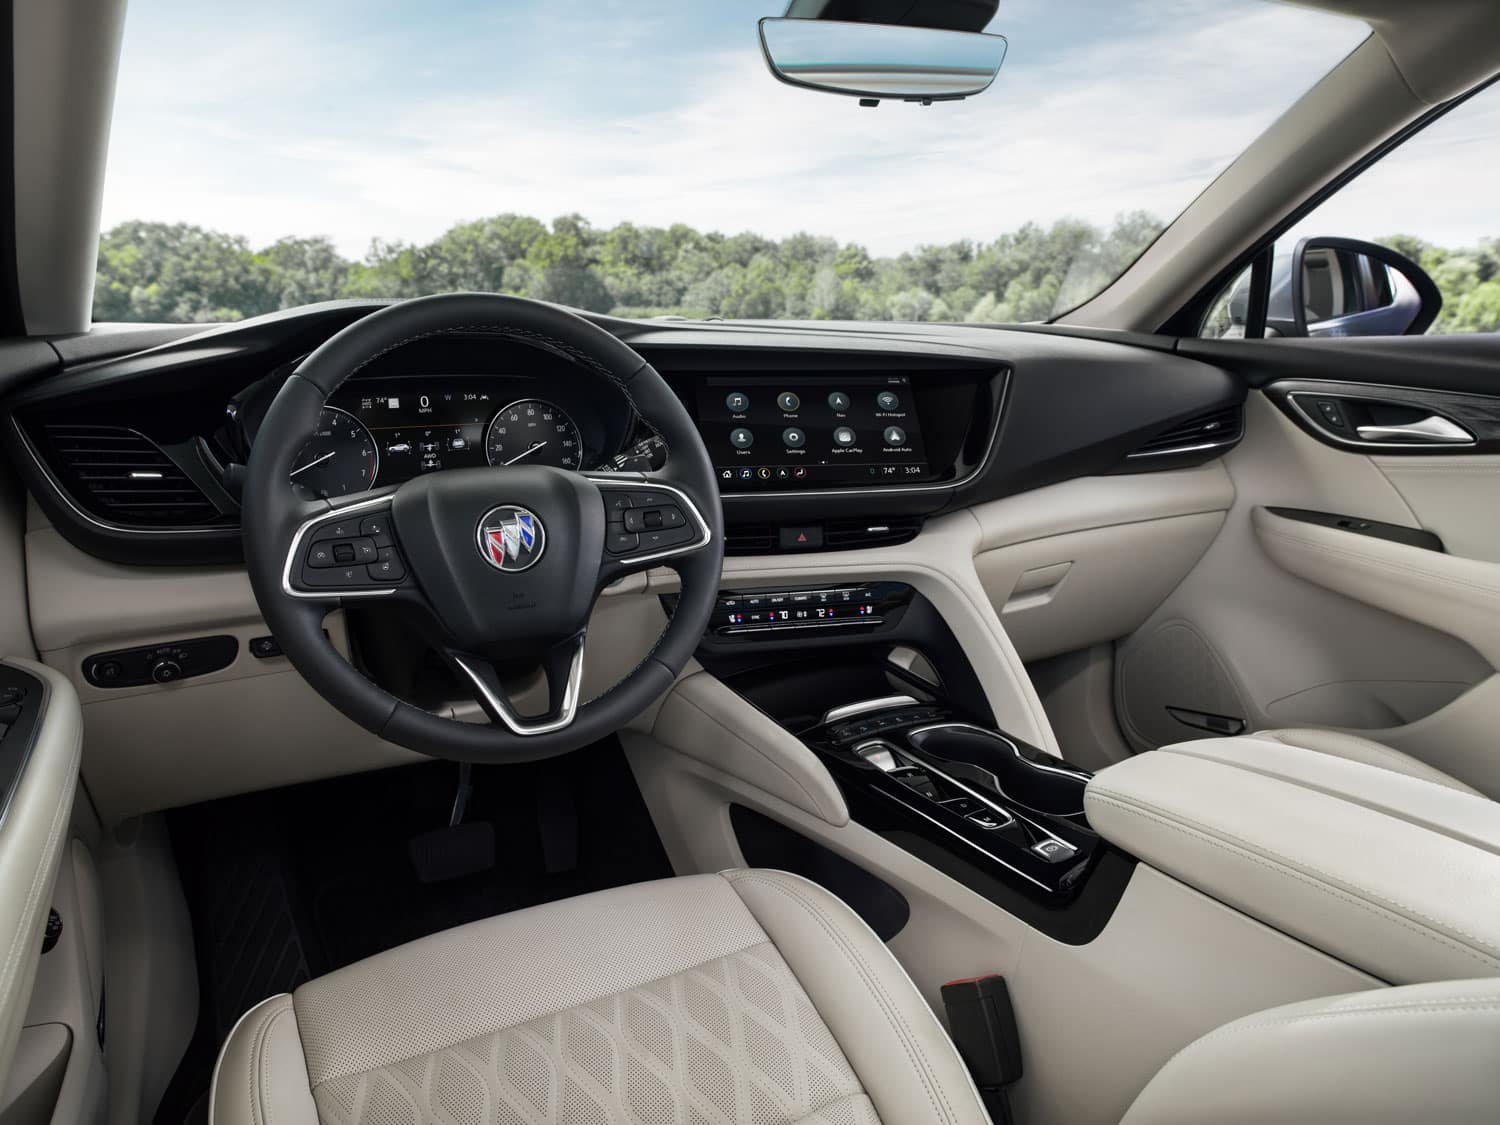 2021 Buick Envision Features | Buick Dealer Near Me